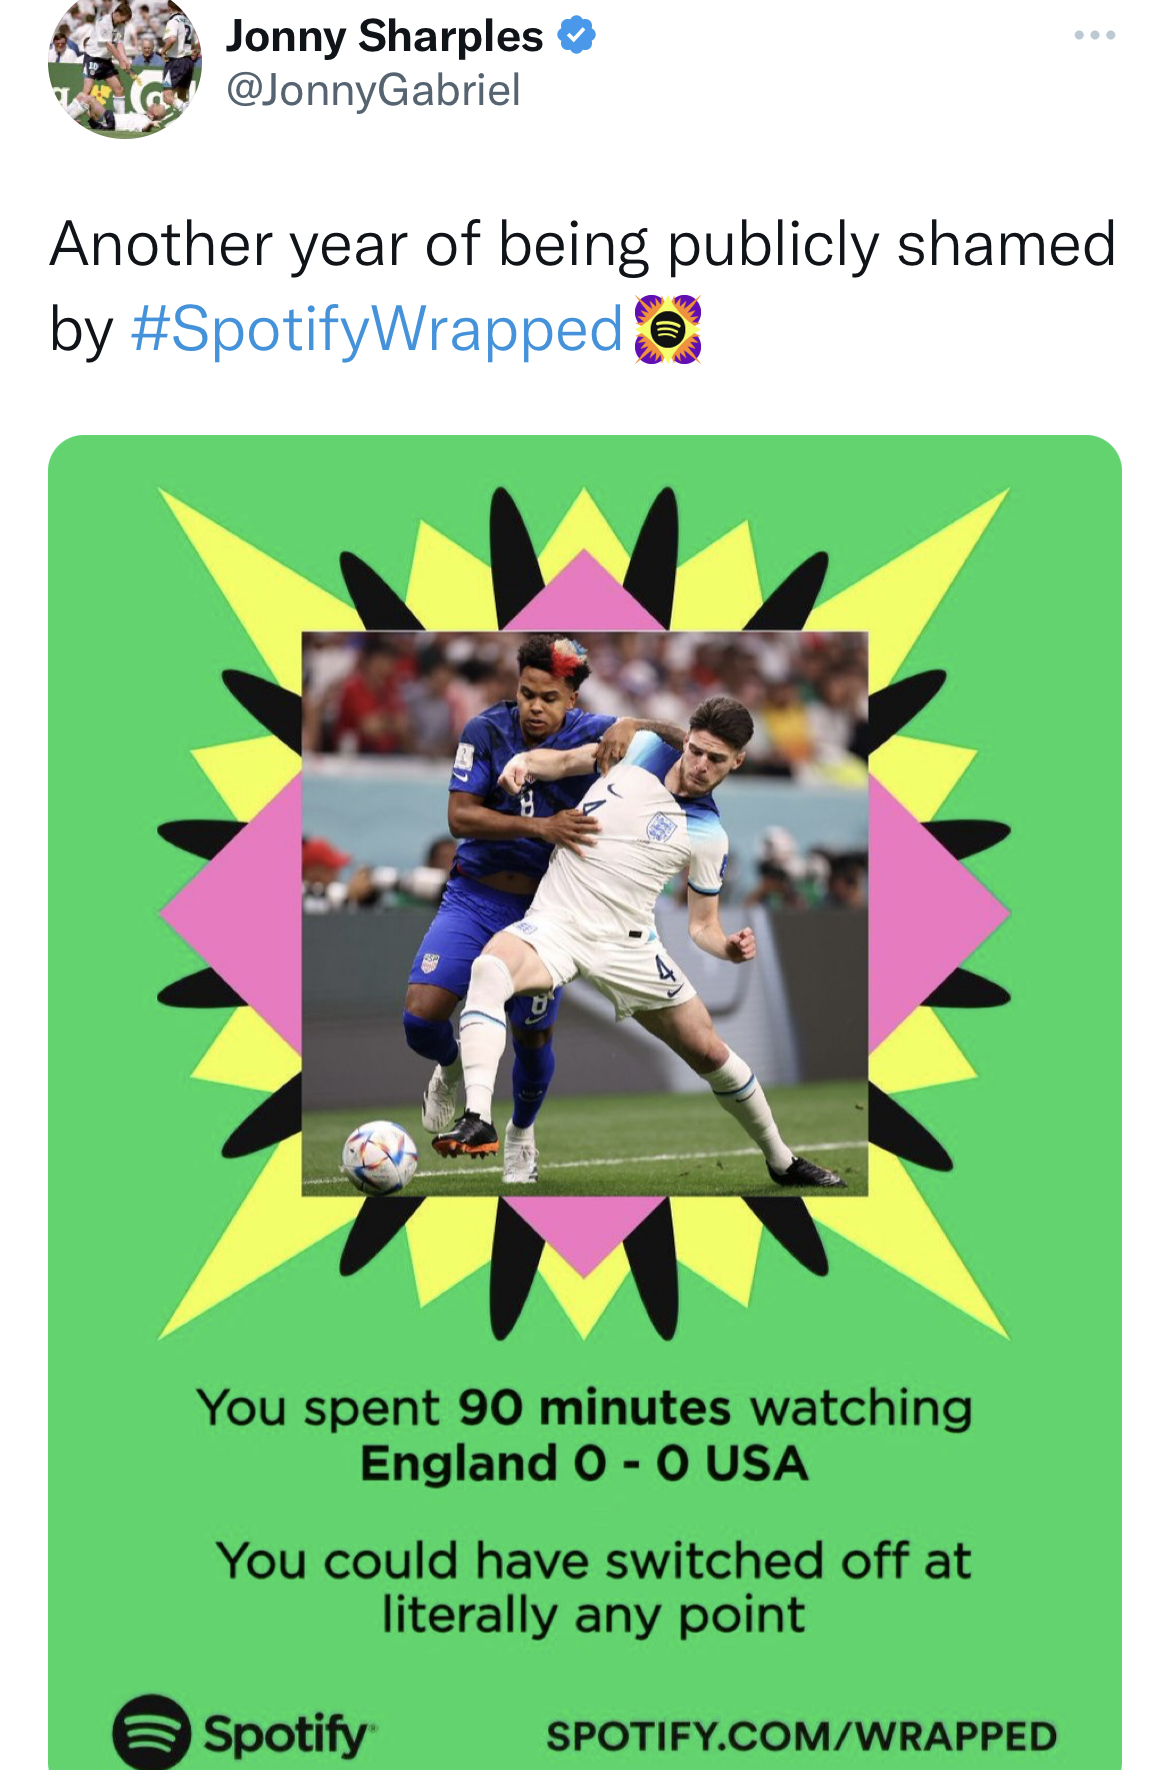 Spotify Wrapped Memes - sports - Jonny Sharples Another year of being publicly shamed by You spent 90 minutes watching England 00 Usa You could have switched off at literally any point Spotify Spotify.ComWrapped